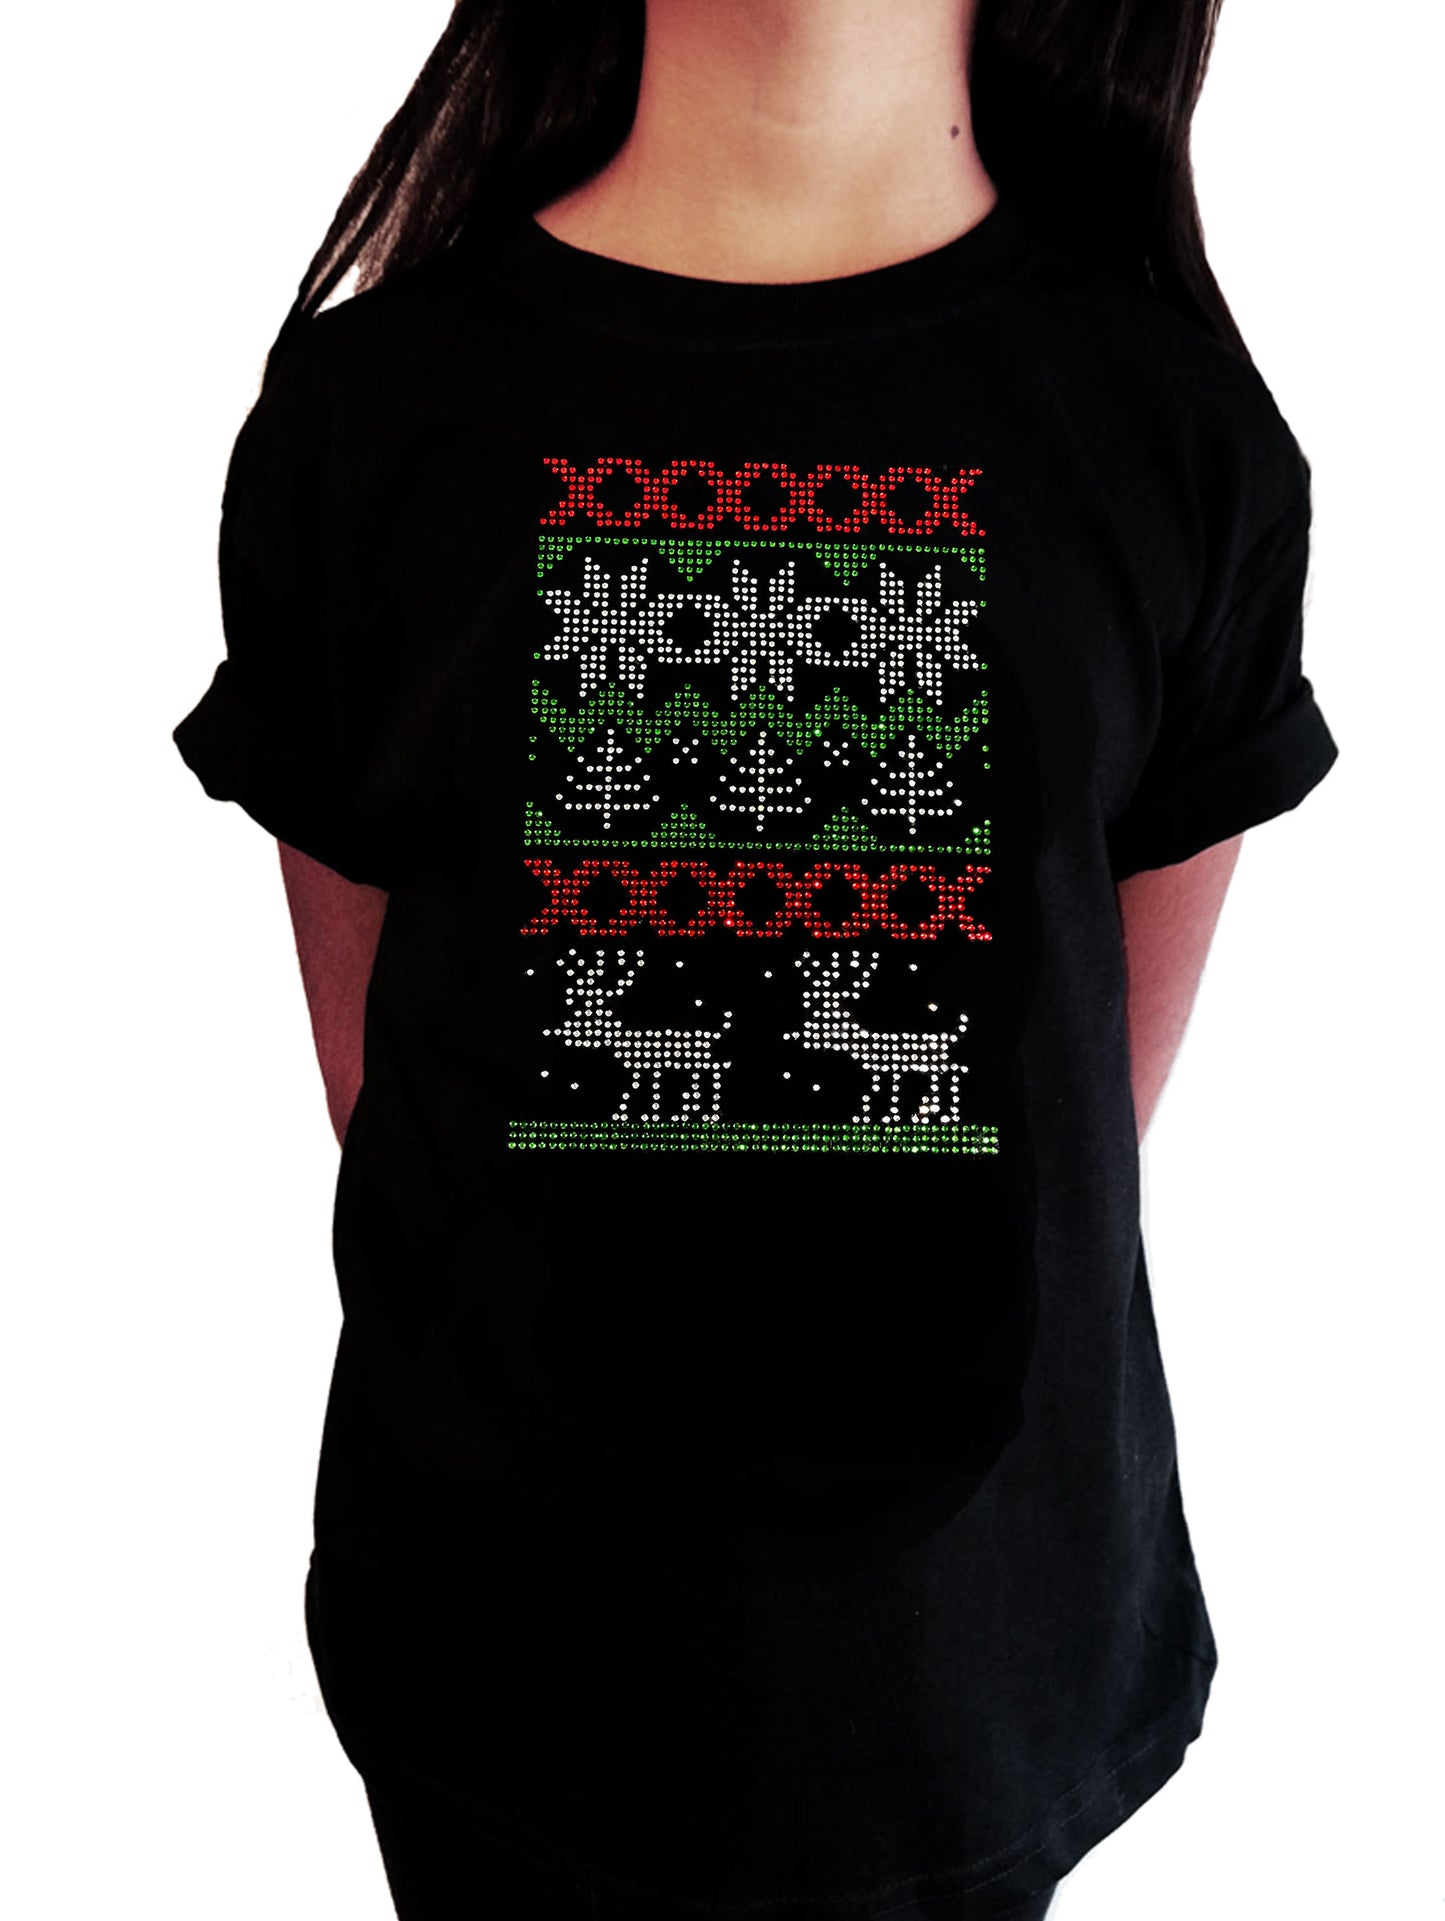 Girls Rhinestone T-Shirt " Christmas Ugly Shirt with Reindeer in Rhinestone " Kids Size 3 to 14 Available